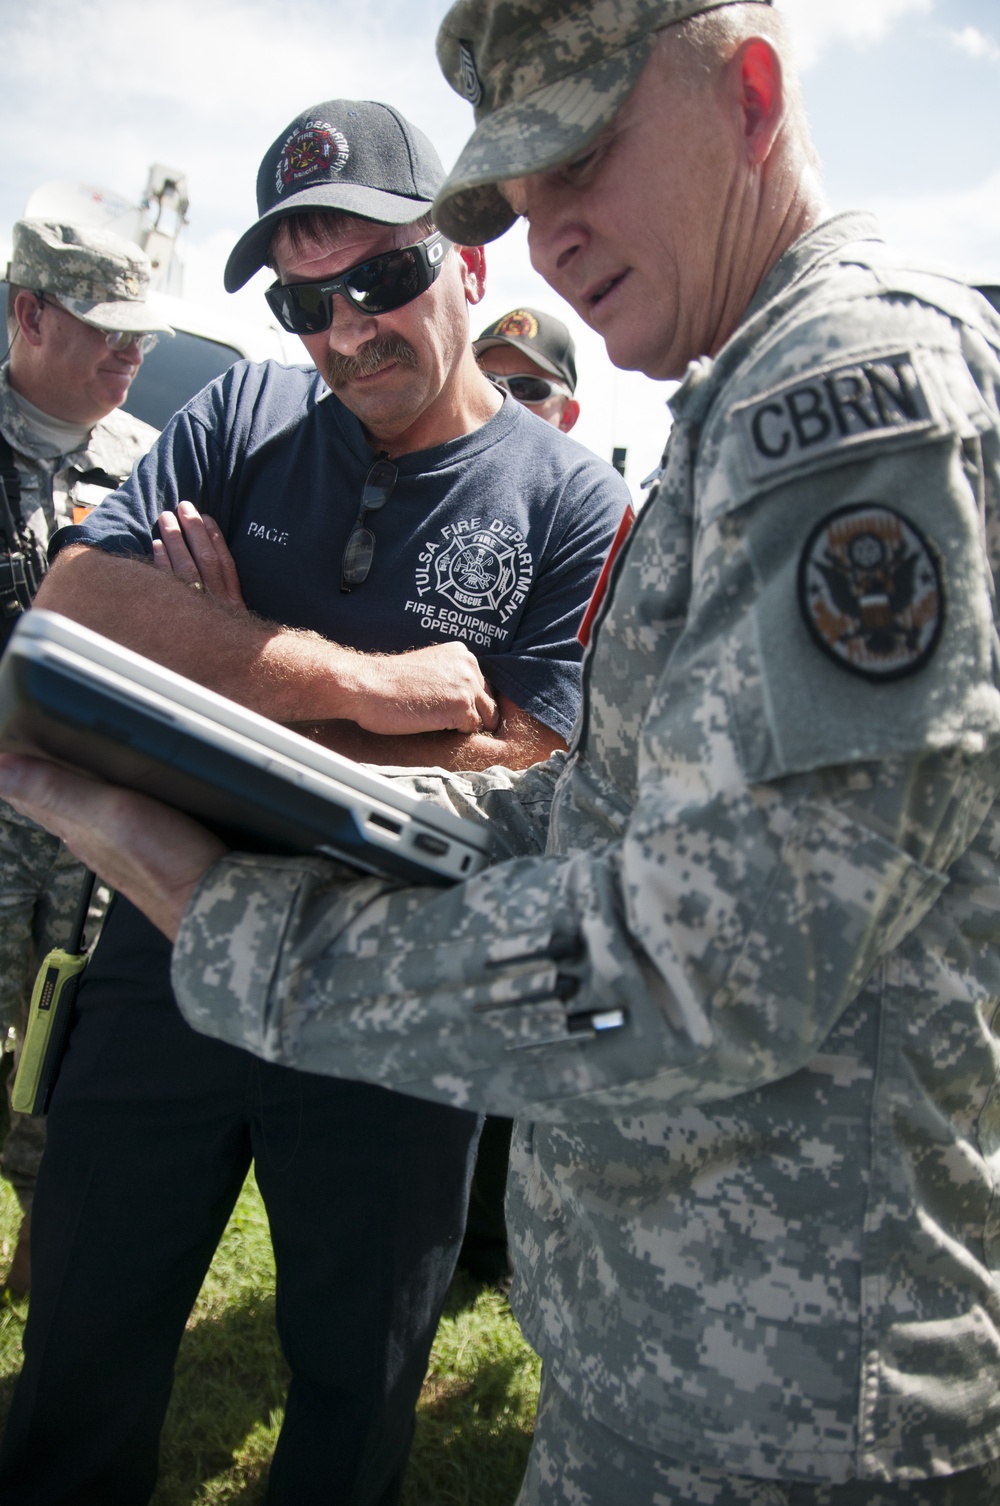 Oklahoma National Guard trains with First Responders